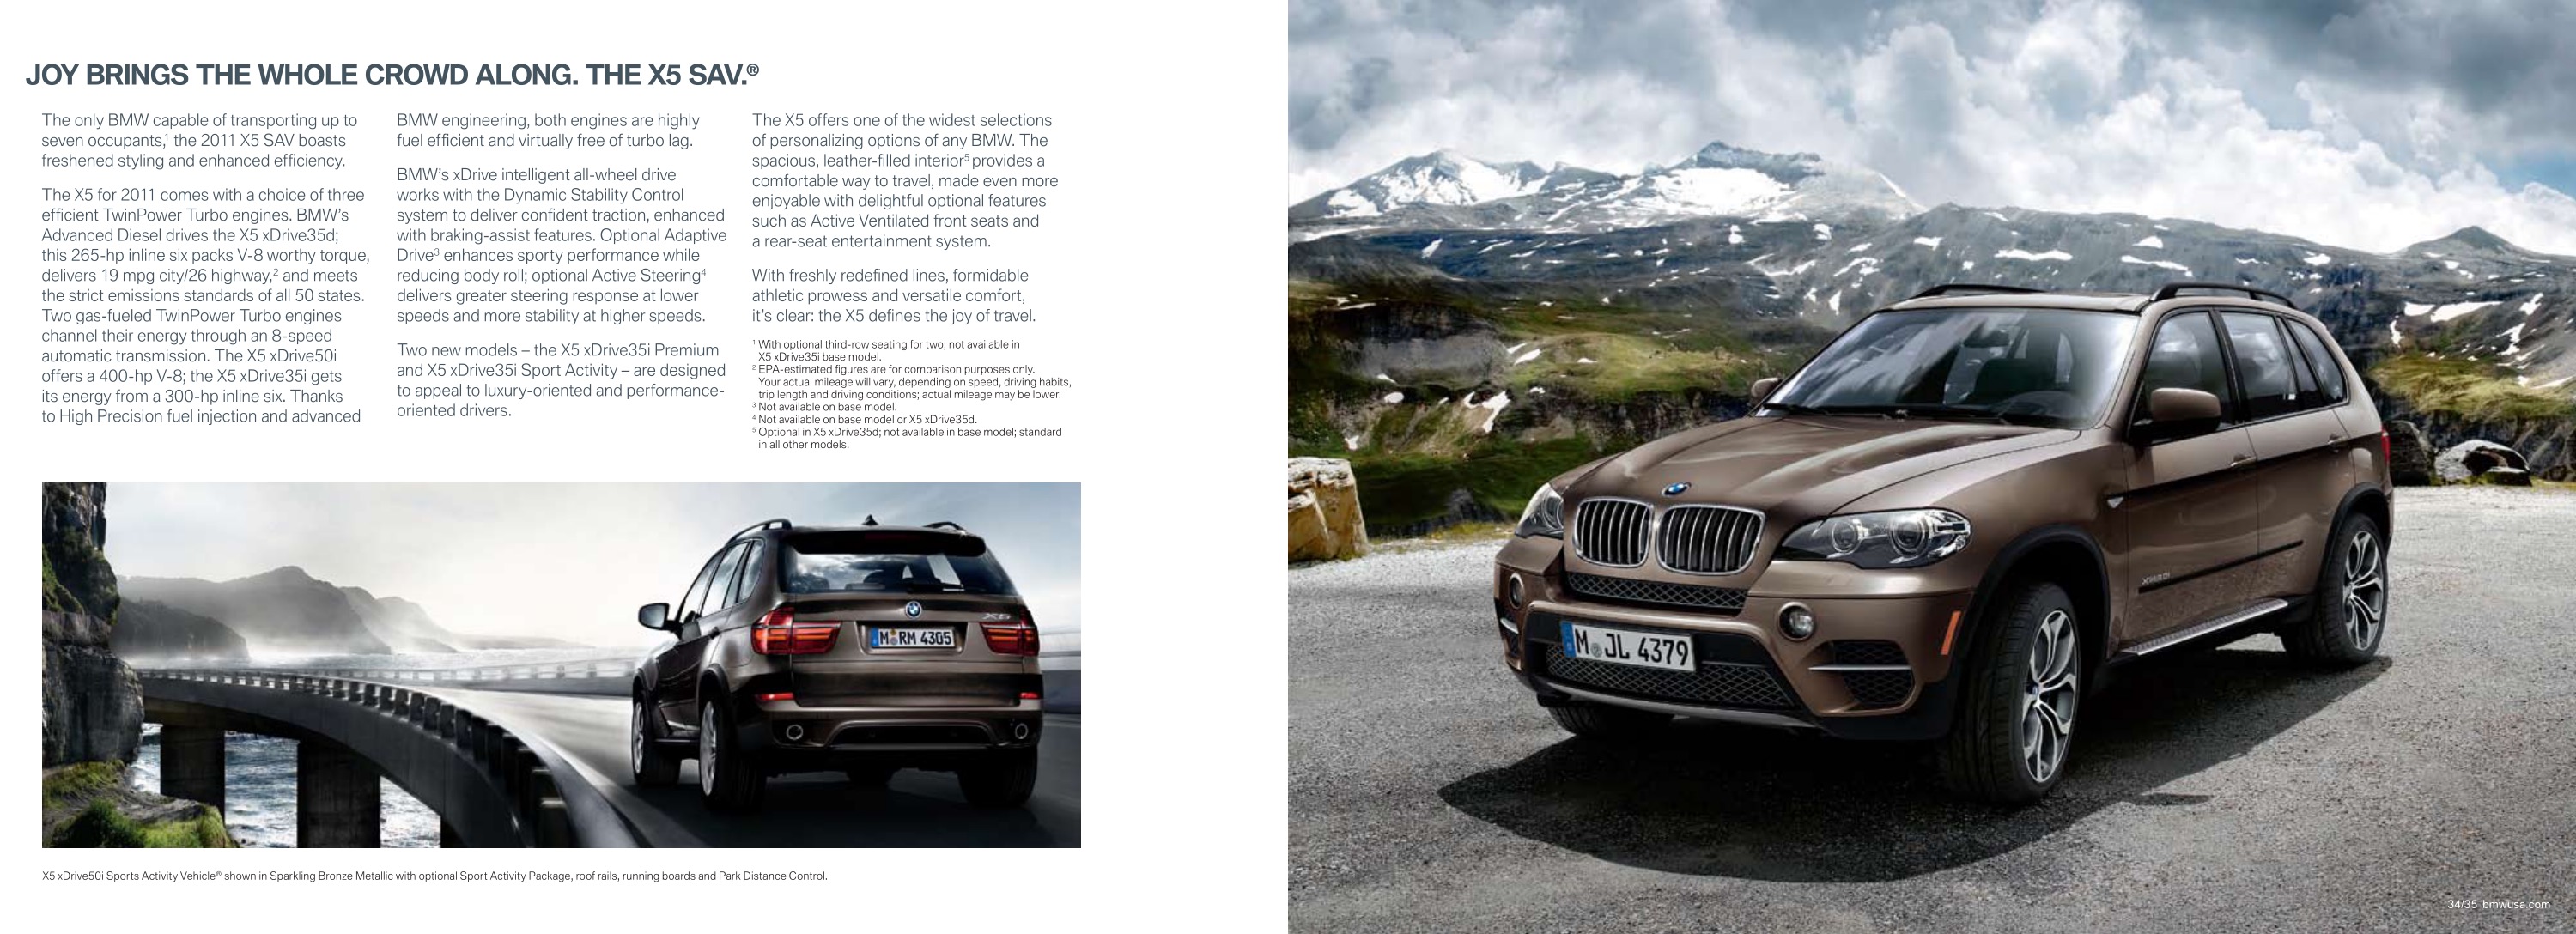 2011 BMW Full-Line Brochure Page 7